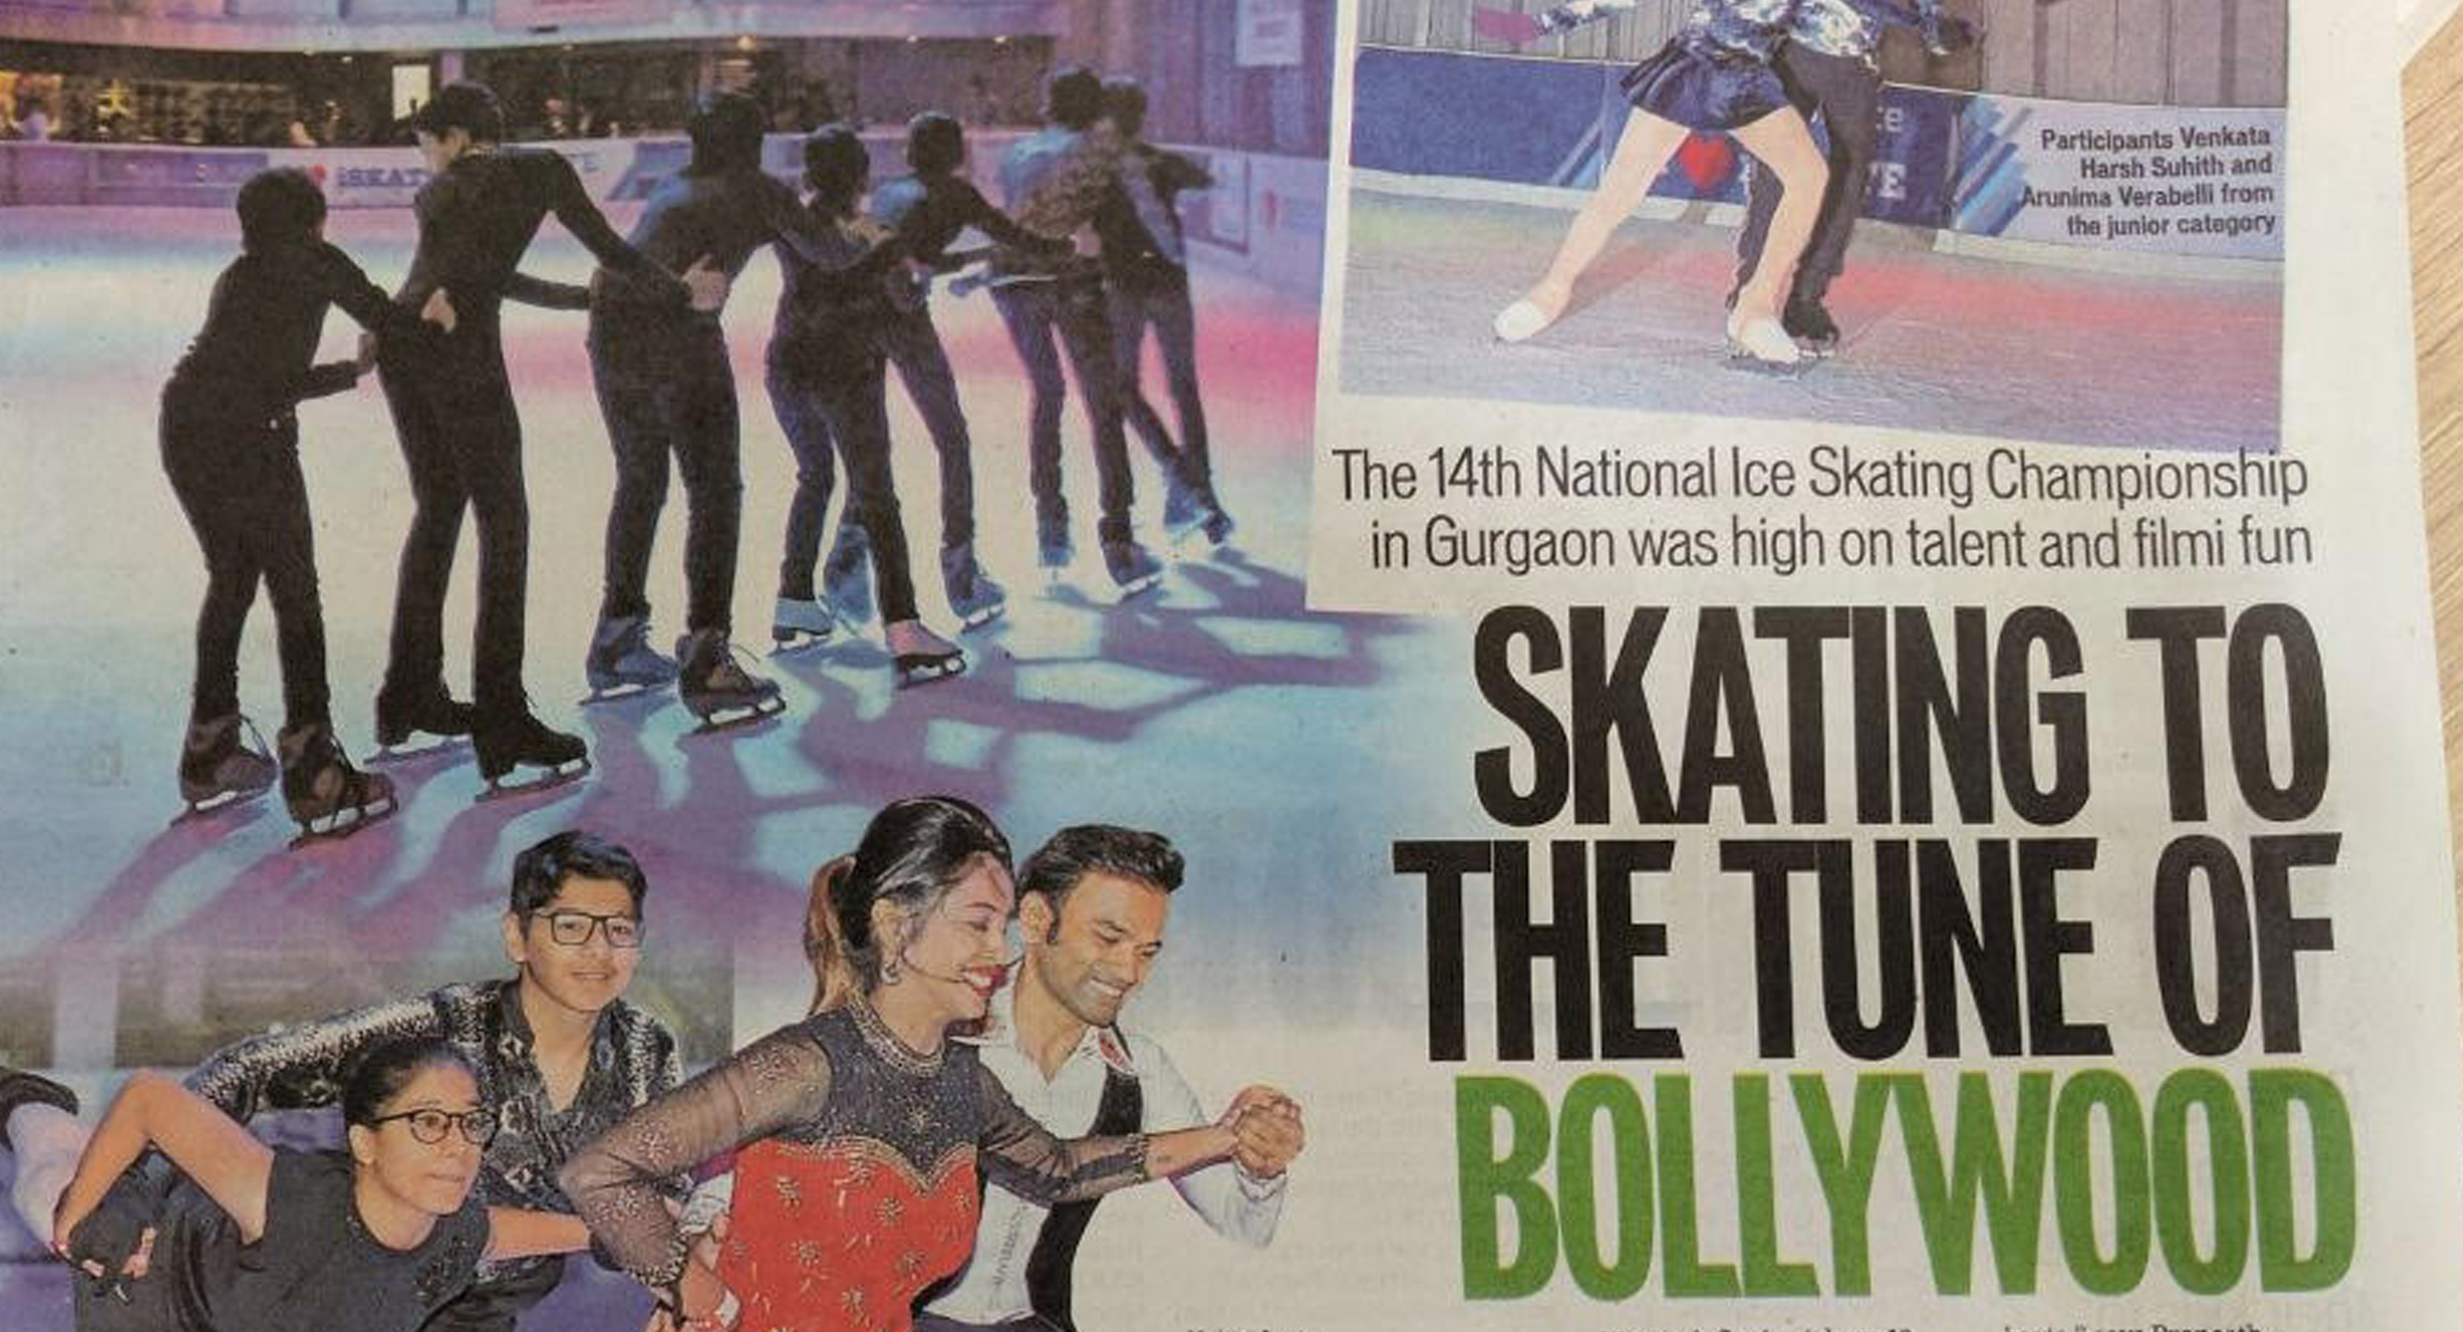 Skating to the tune of Bollywood